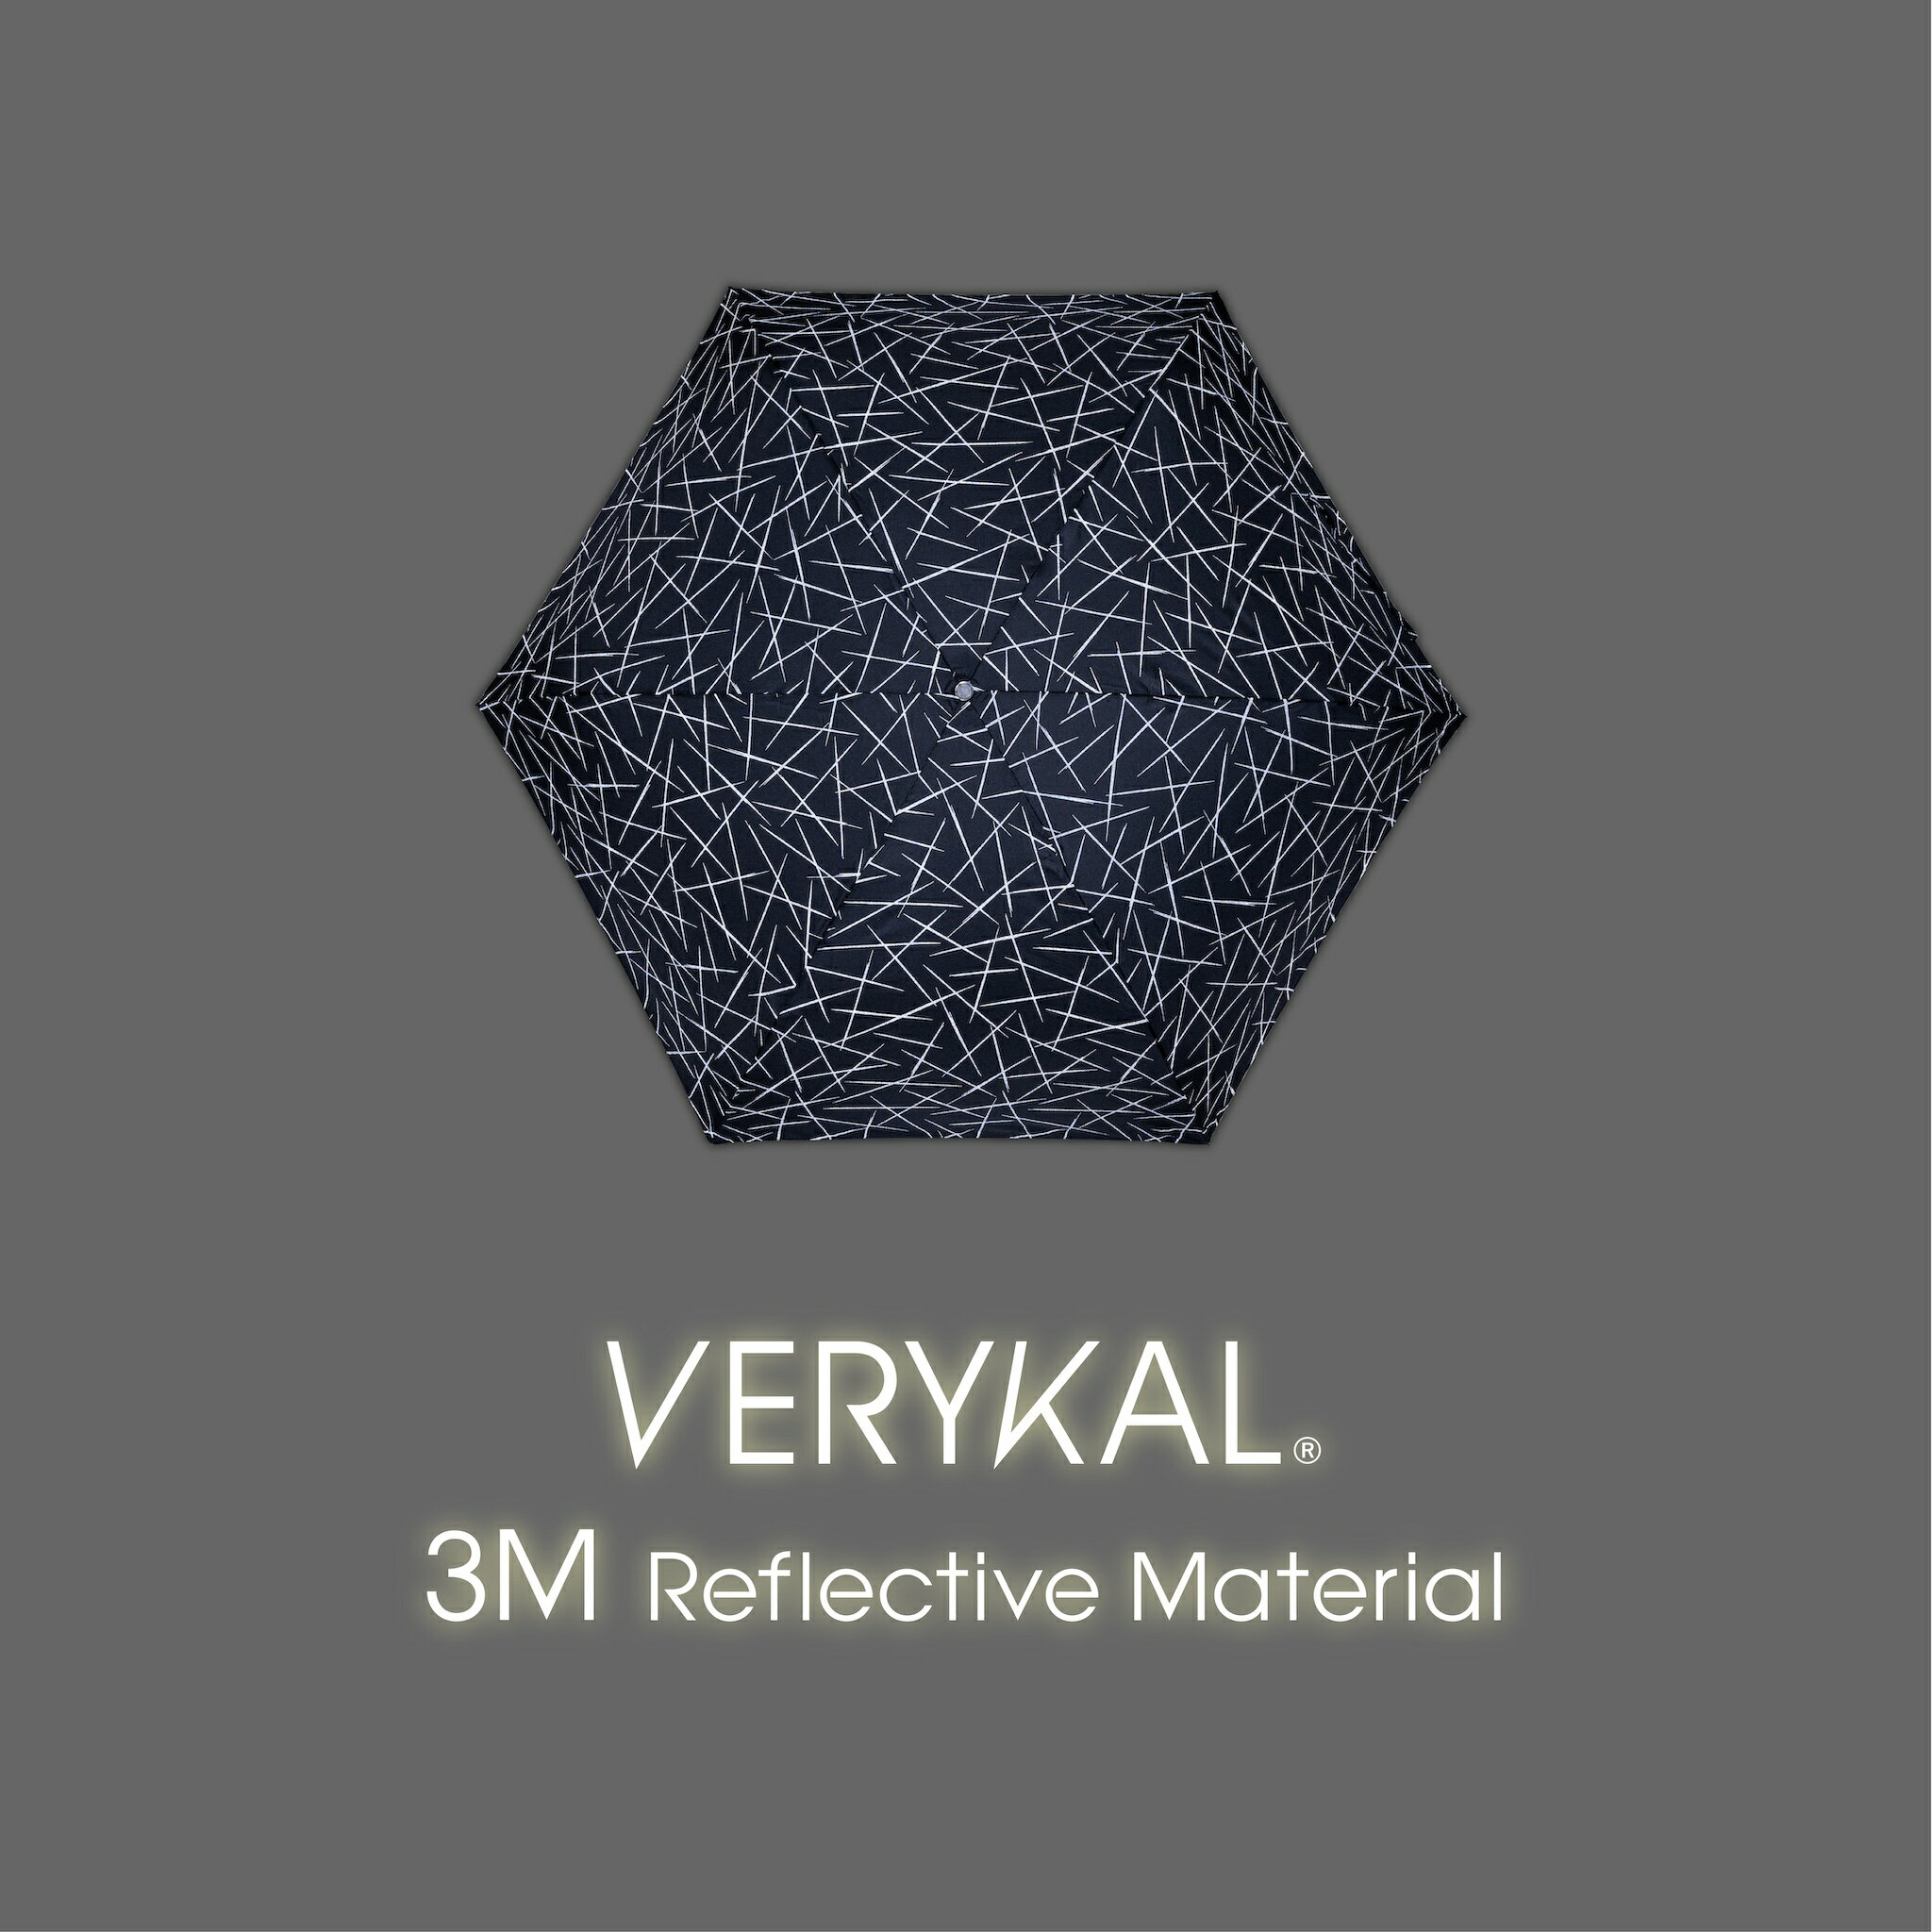 3M Reflective Material VERYKAL 反射 丈夫 折りたたみ 軽量 夜道 安全